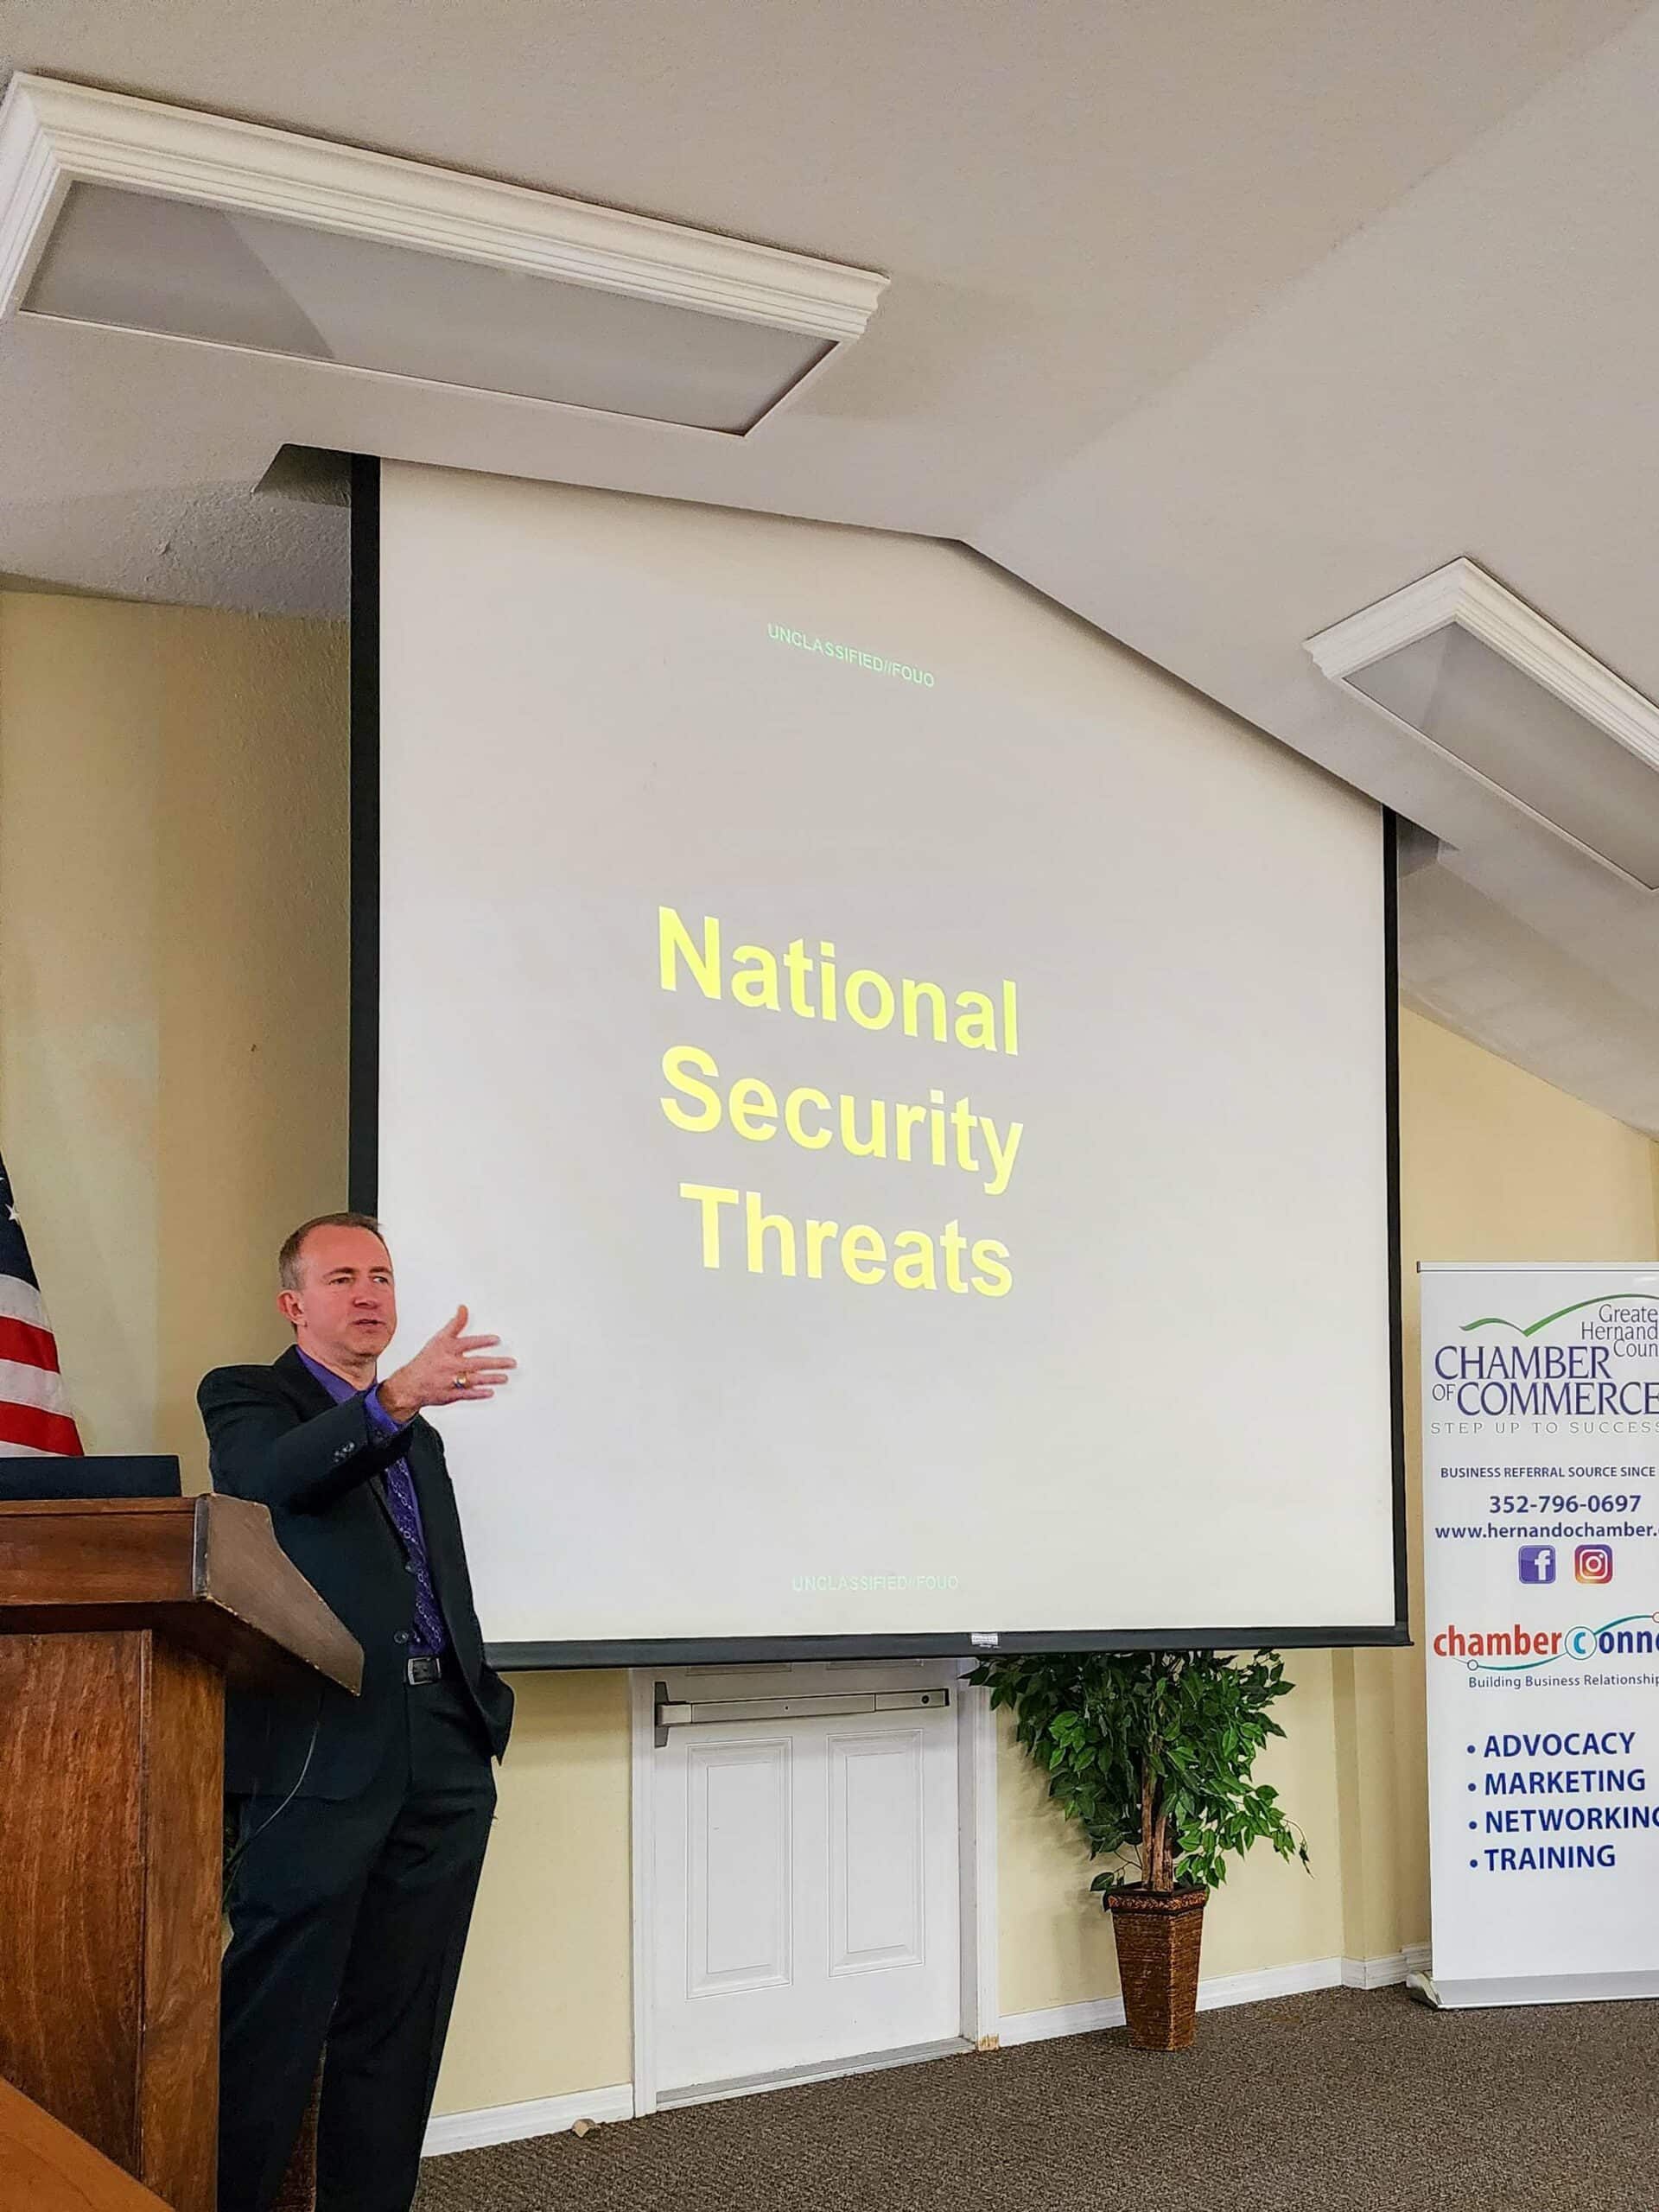 FBI Special Agent Sekela discusses national security threats due to cyber attacks.